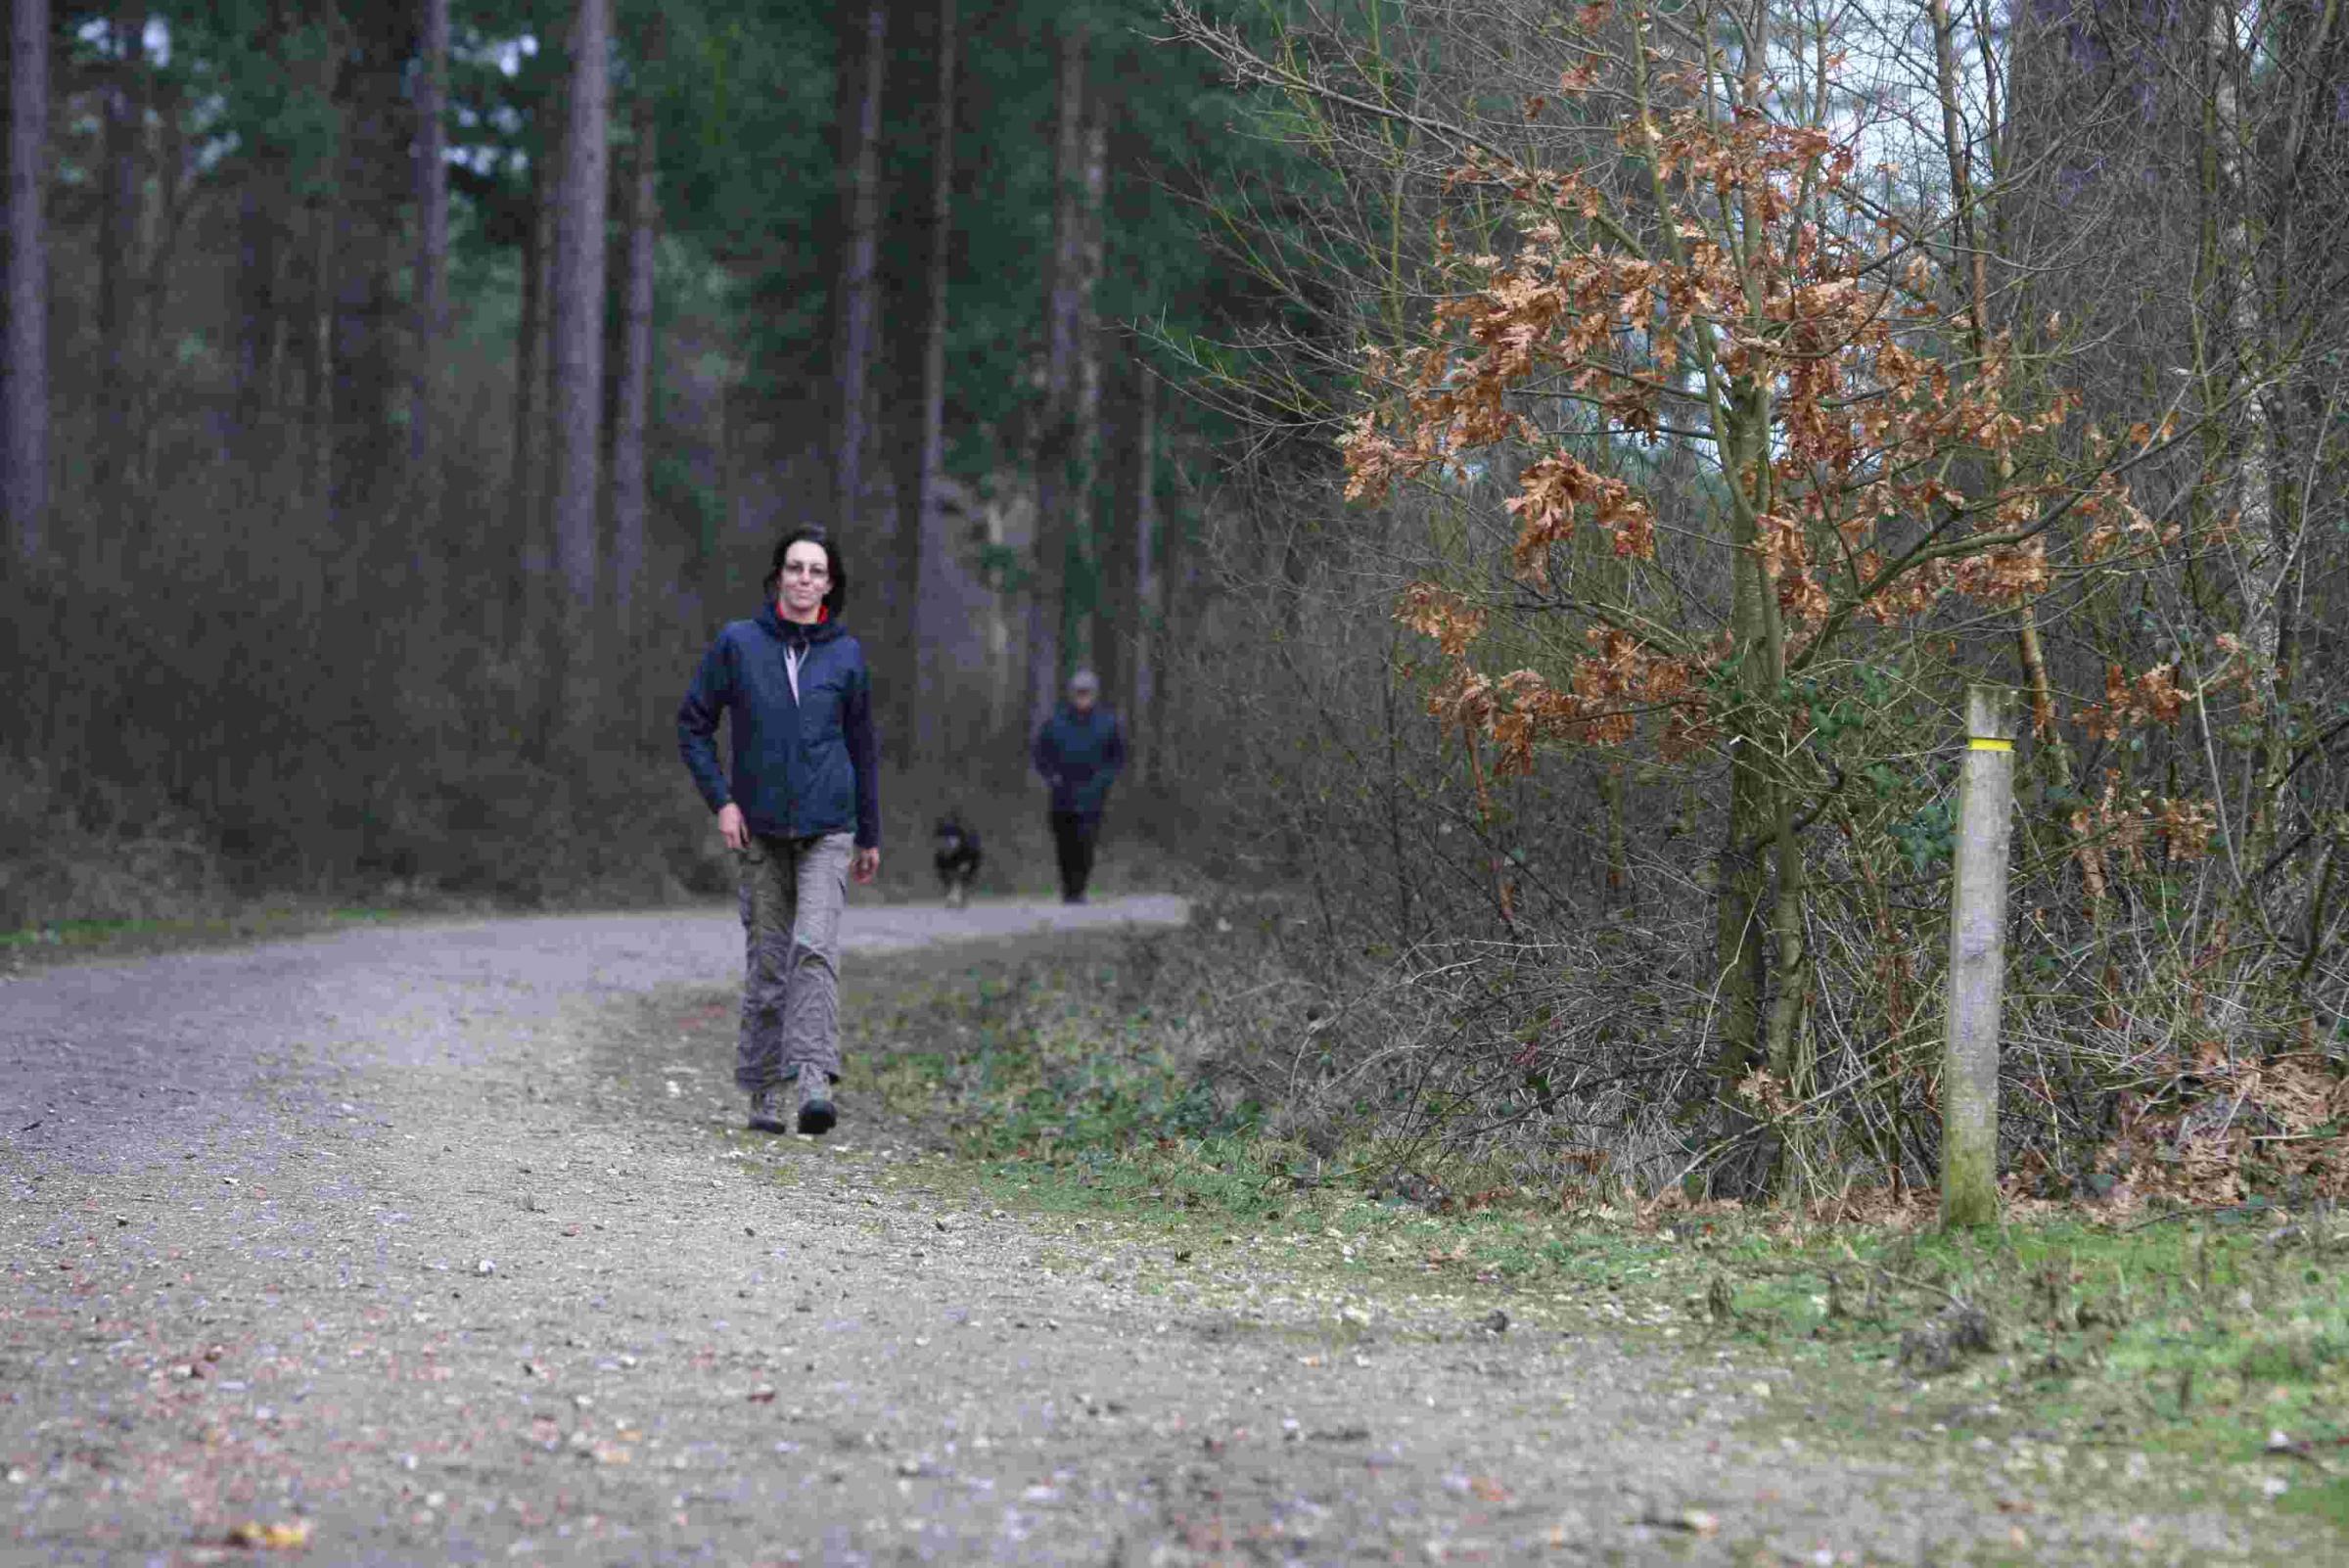 Pic Hattie Miles ... 07.02.11 ... pWarehamFor ... Stephanie Legg walking in Wareham Forest. Stephanie has established a campaign to fight the government sell off of woodland and forests.